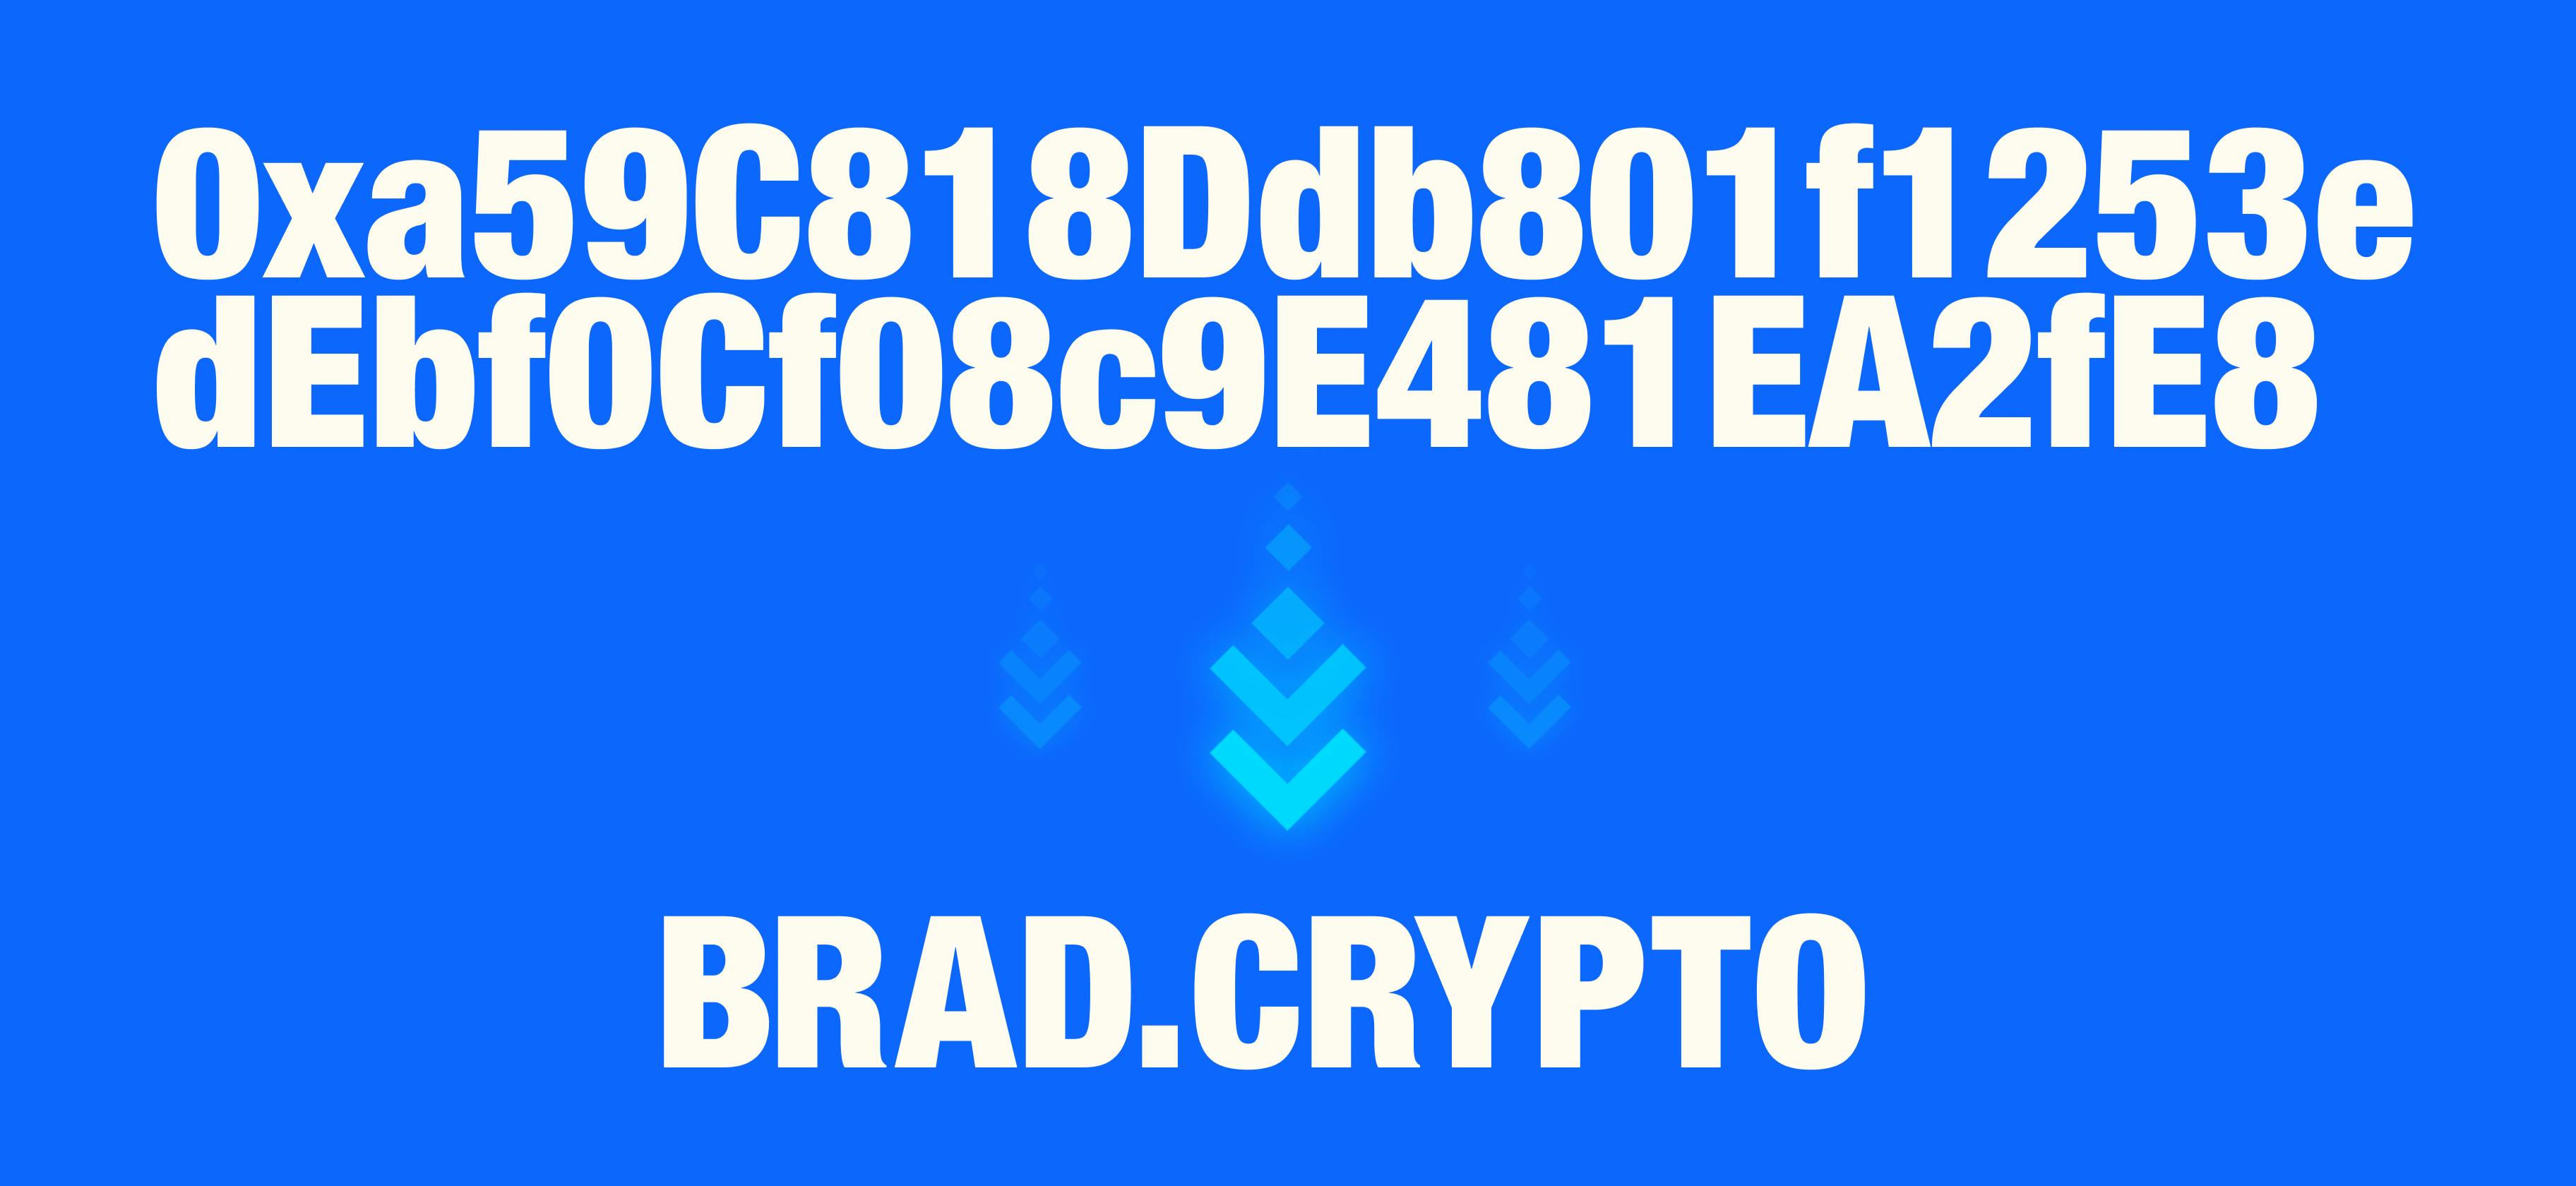 Who wants to send crypto to a 40 character hexadecimal address when they could use a Web3 domain? Nobody.